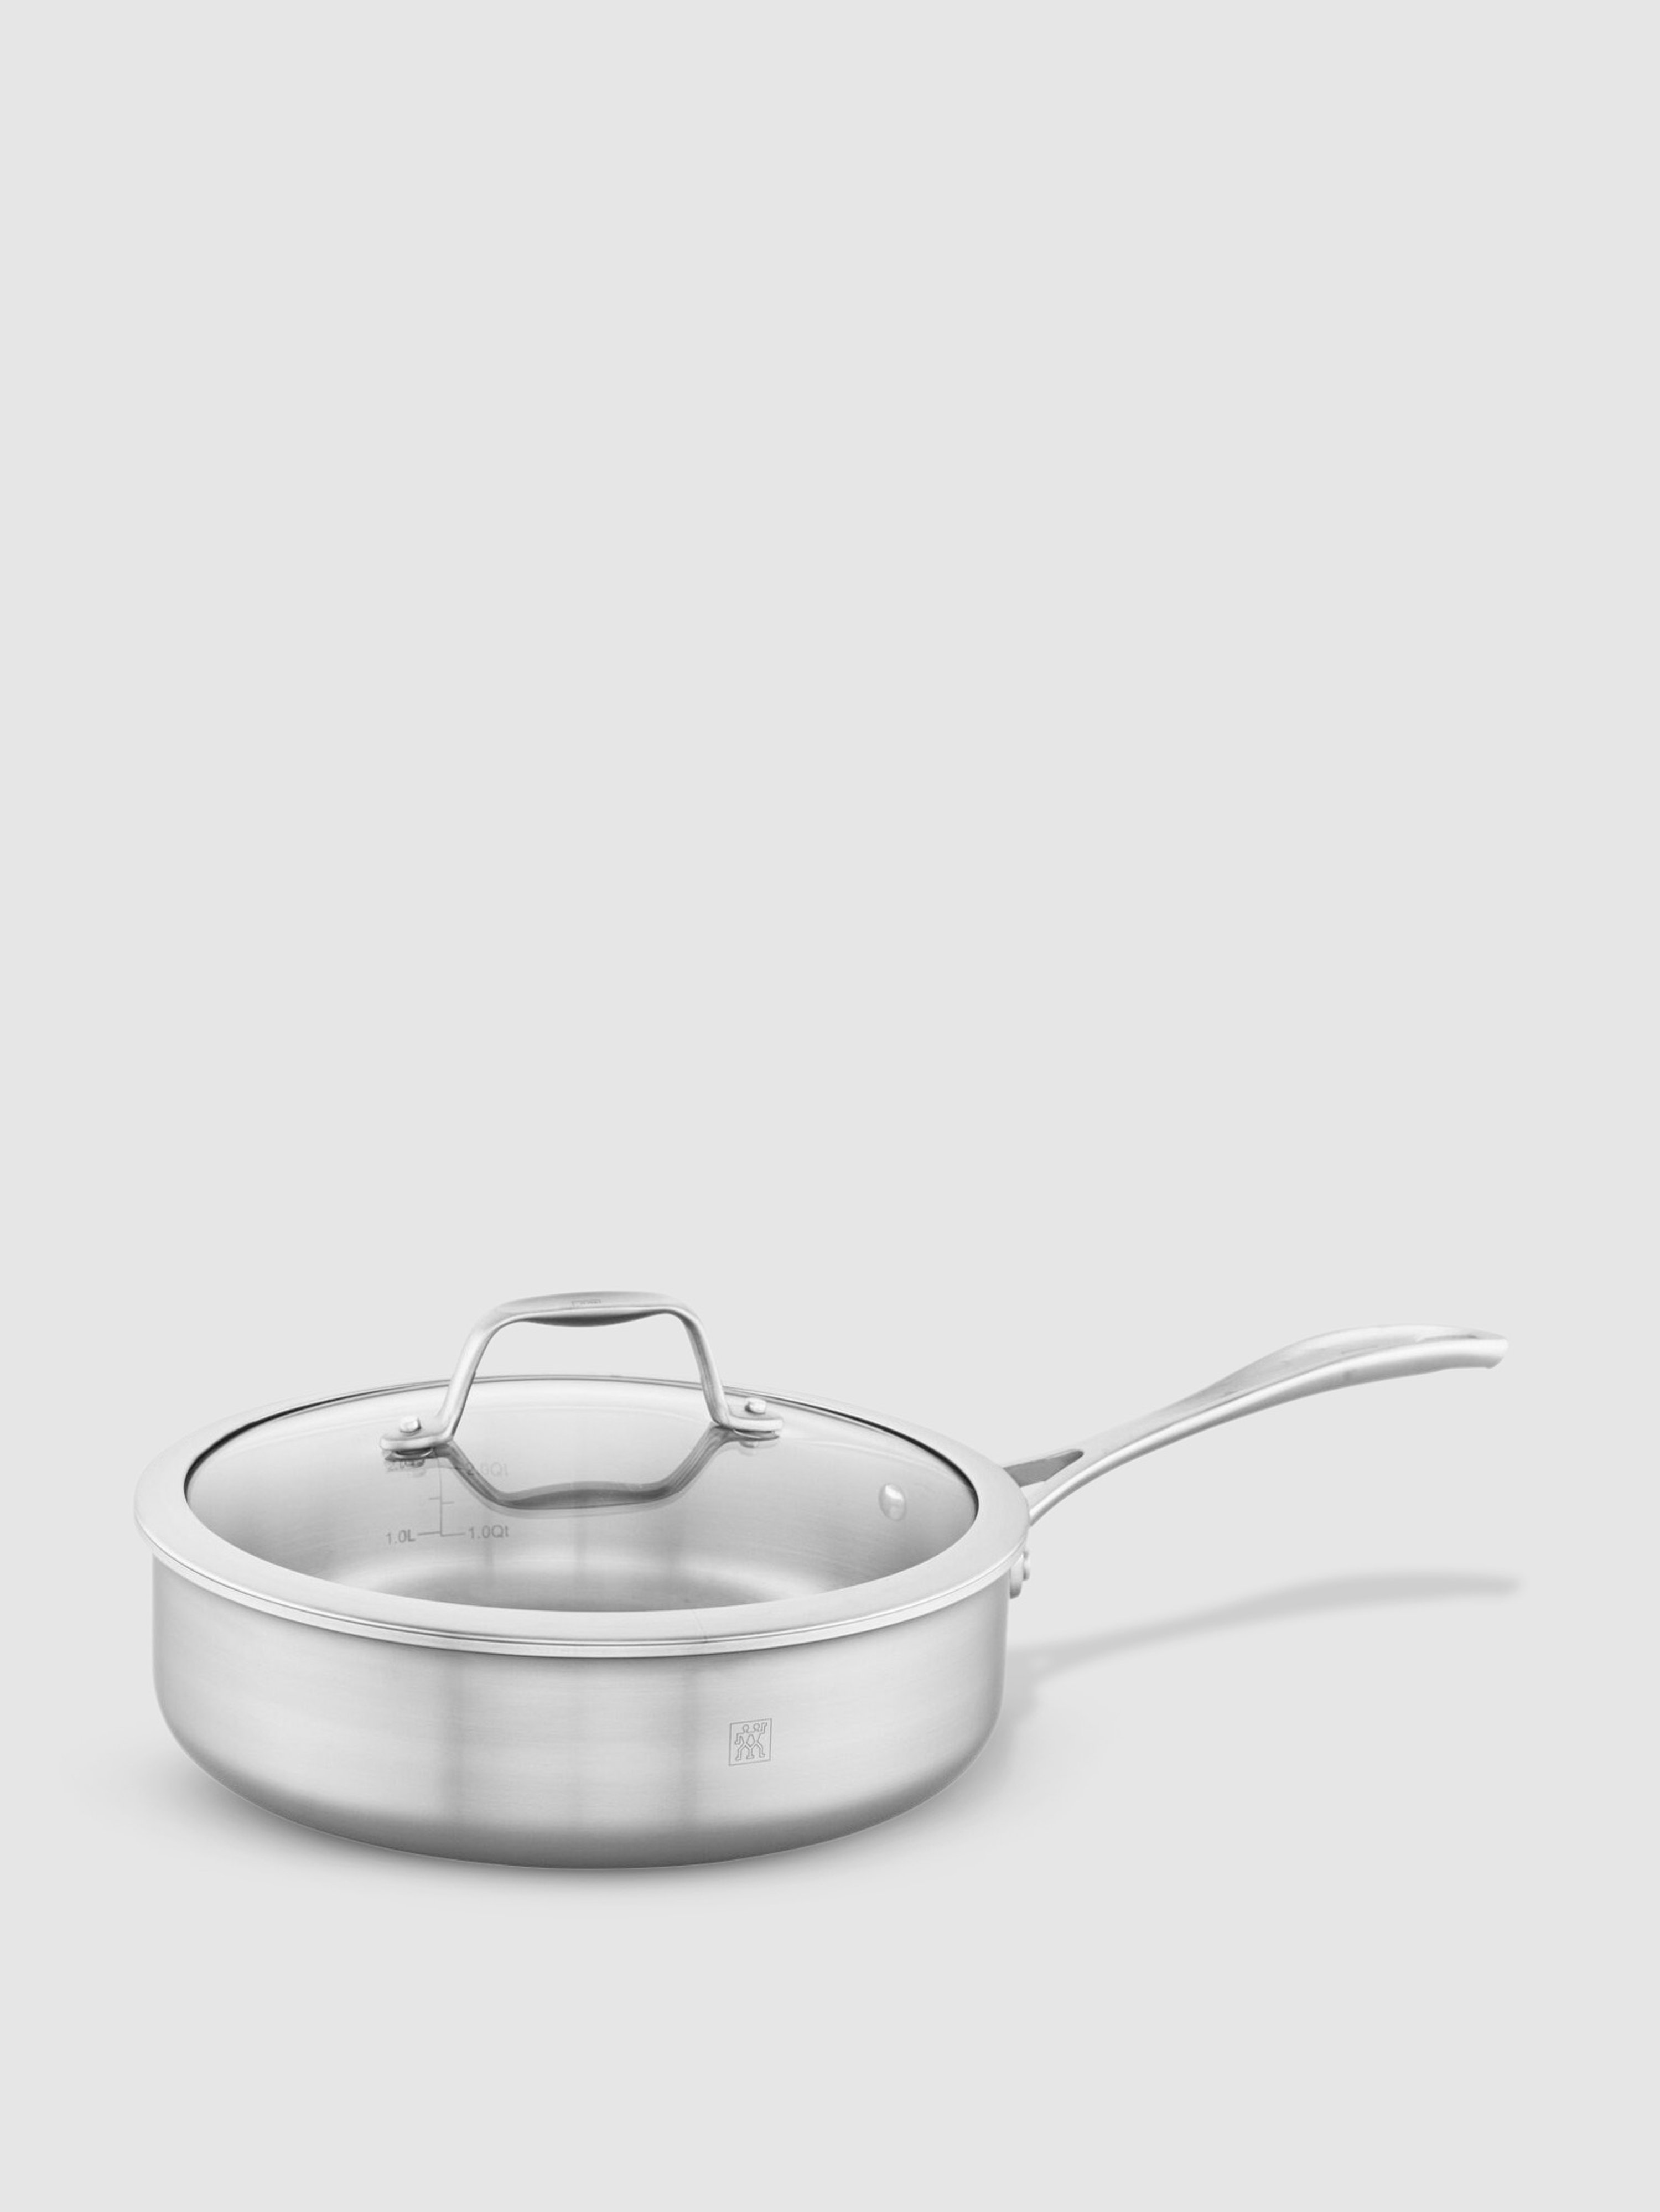 Zwilling Spirit 3-ply 3-qt Stainless Steel Sauté Pan